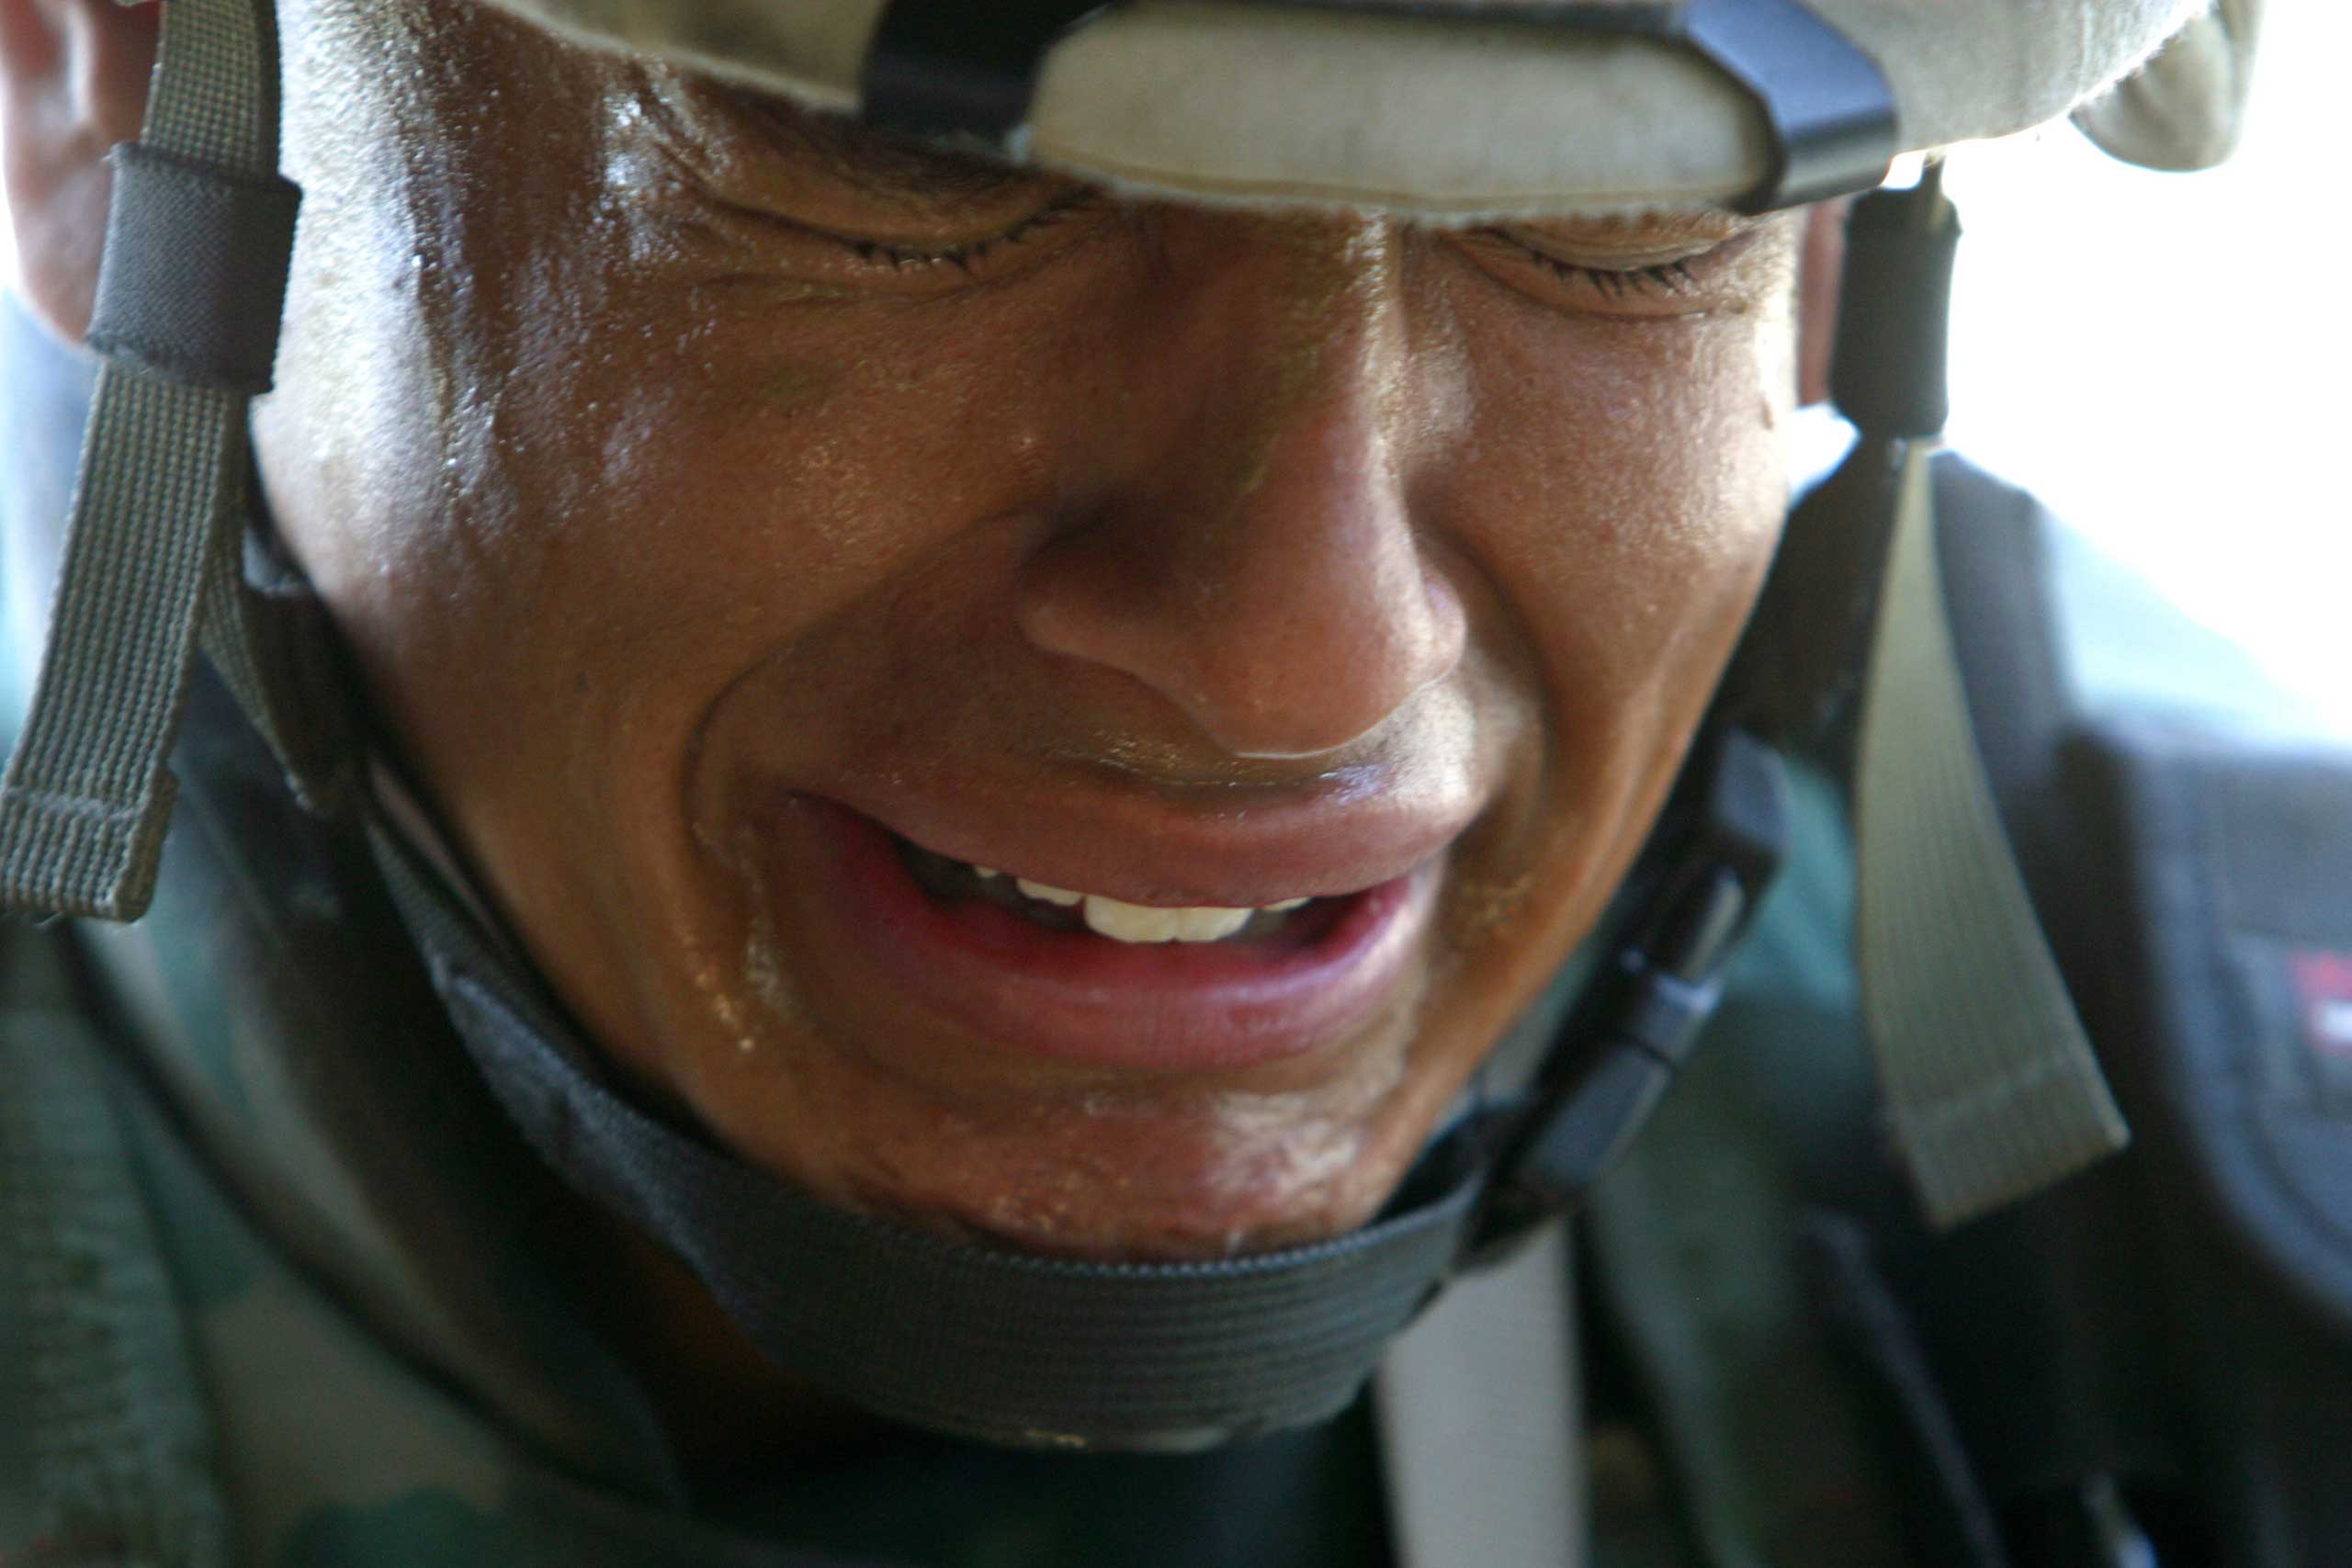 Robert King, June 5, 2004
                              
                              A soldier with Battery B, 3rd Battalion, 112th Field Artillery, Army National Guard of Lawrenceville, N.J. cries as the 1st Cav extract the body of Army Spc. Ryan E. Doltz. Army Spc. Doltz was killed along with Sgt. Humberto Timoteo after an IED exploded under their vehicle during a patrol in Sadr City. 
                              This image was taken a few days after I escaped from being kidnapped in Fallujah. The kidnapping and the threat of being killed was an overwhelming experience that effected me both mentally and physically. Instead of packing it up and exiting this current theater of war, I decided to double down and continue working. By doing so I was able to deal with the physiological impact of the kidnapping in a healthy and productive manner. The image still haunts me, and at times, members of Battery B, 3rd Battalion, 112th Field Artillery, Army National Guard, have reached out to thank me for my work. It brings closure to this horrific tragedy where American heroes gave the ultimate sacrifice to their country.